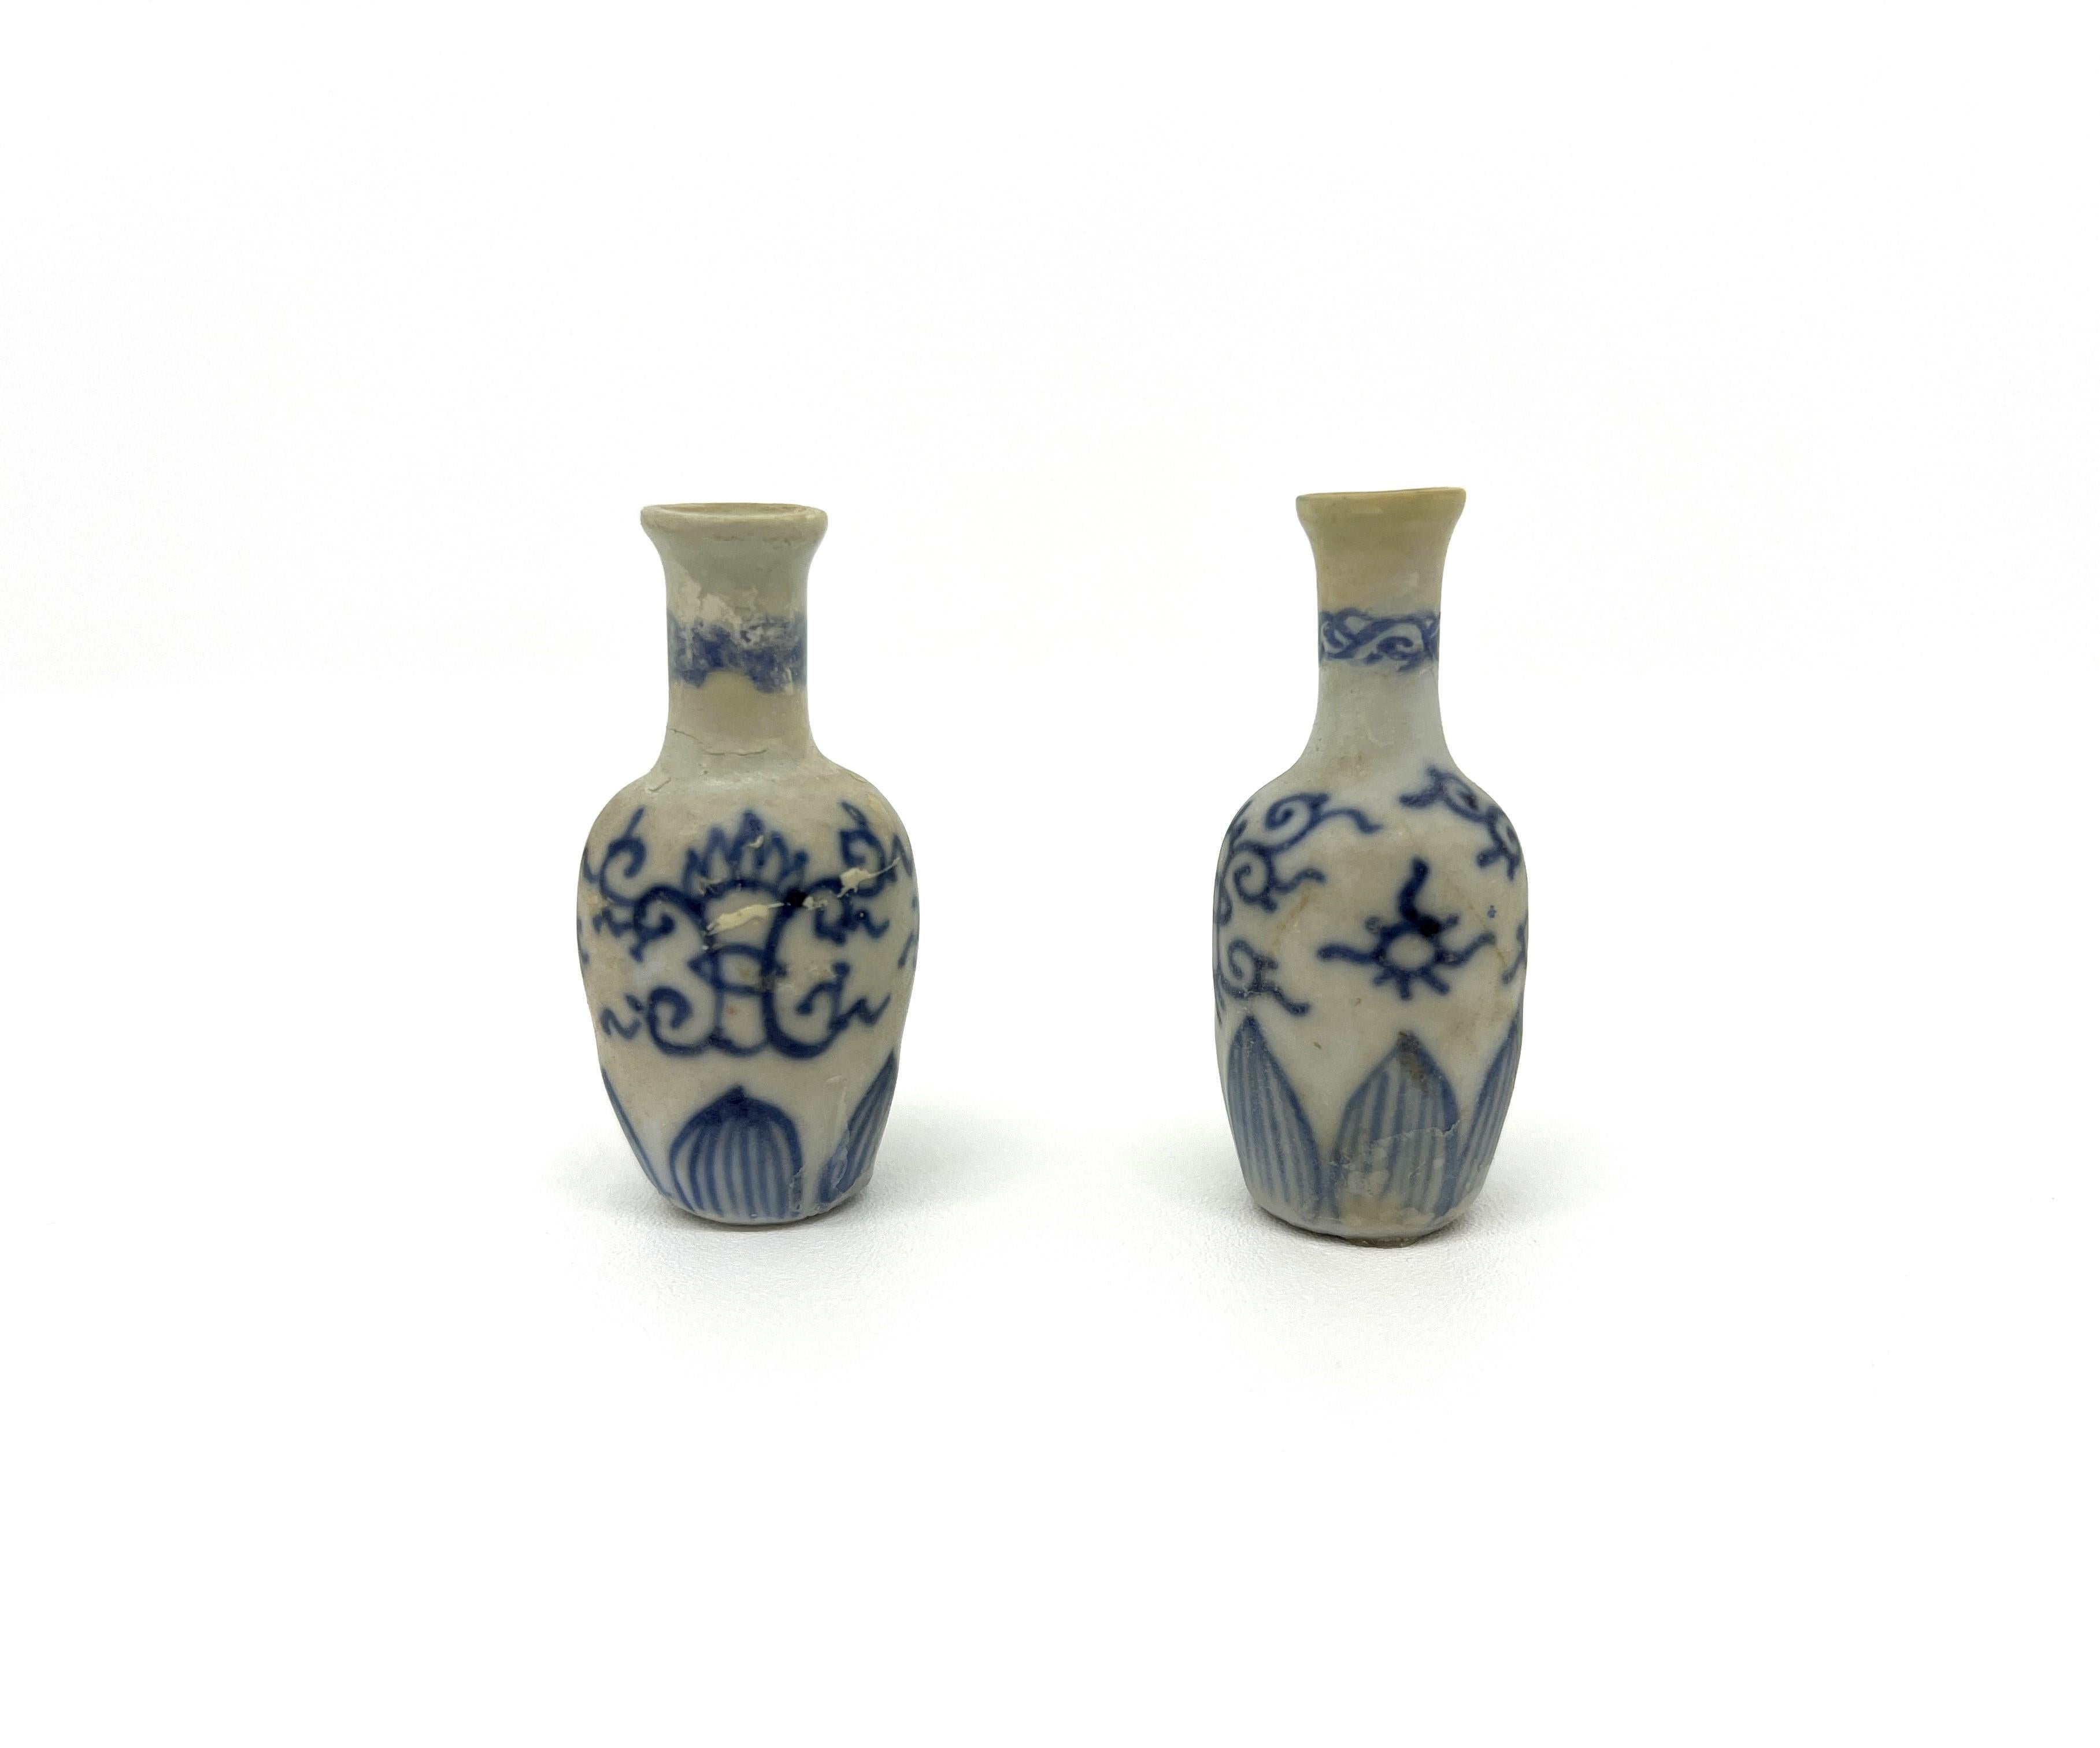 During Yongzheng era, such miniatures were appreciated for their craftsmanship and aesthetic value. They were also often used in scholars' studios as part of the 'wenfang', or study room ensemble, which included various objects intended to inspire